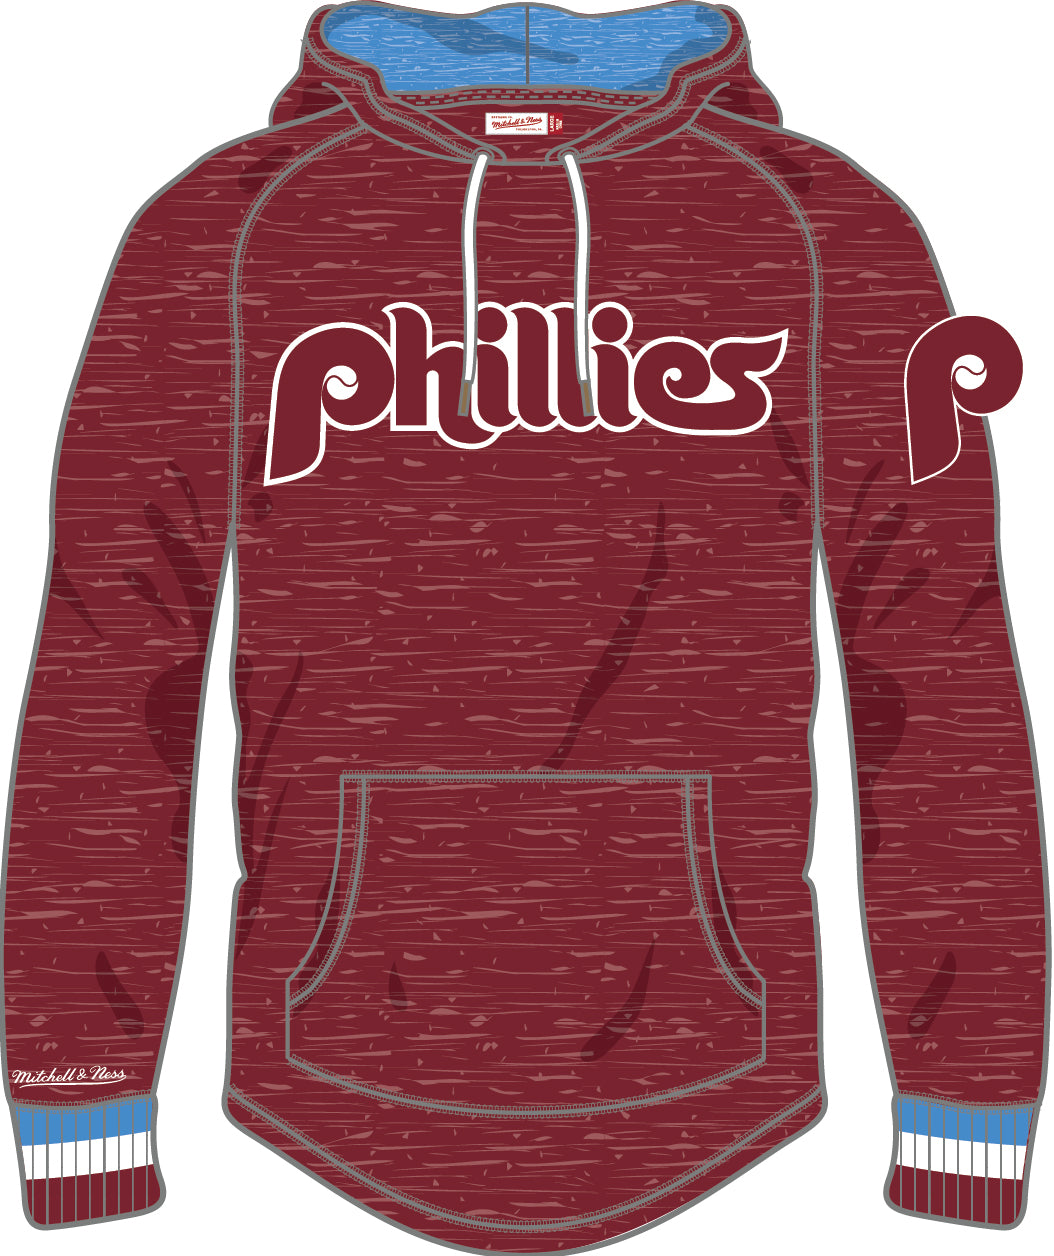 Custom Phillies Hoodie 3D Stitches Stripe Pattern Philadelphia Phillies  Gift - Personalized Gifts: Family, Sports, Occasions, Trending